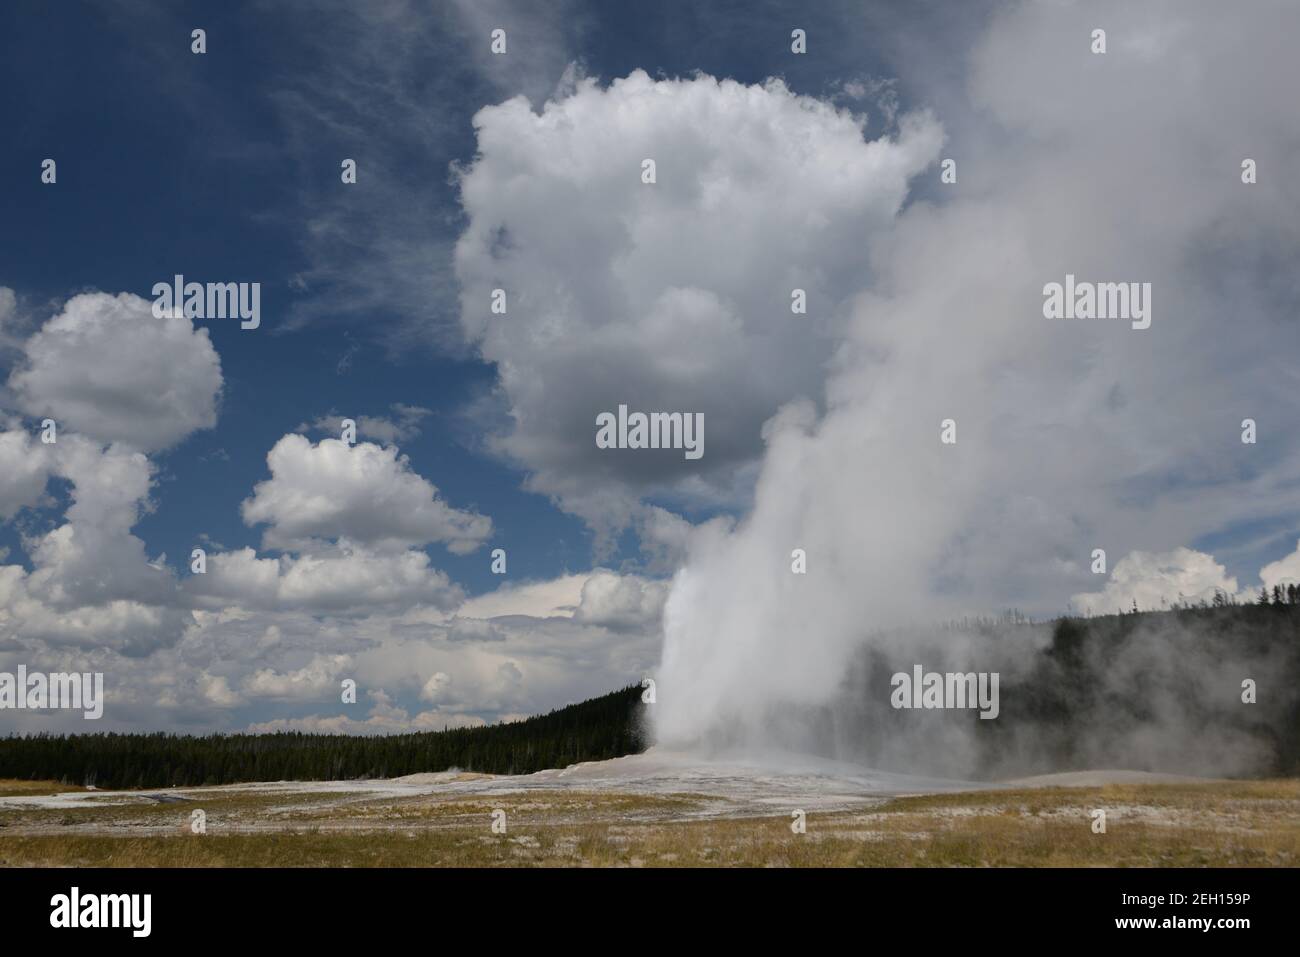 Old Faithful Geyser dans le Parc National de Yellowstone, Wyoming, USA Banque D'Images